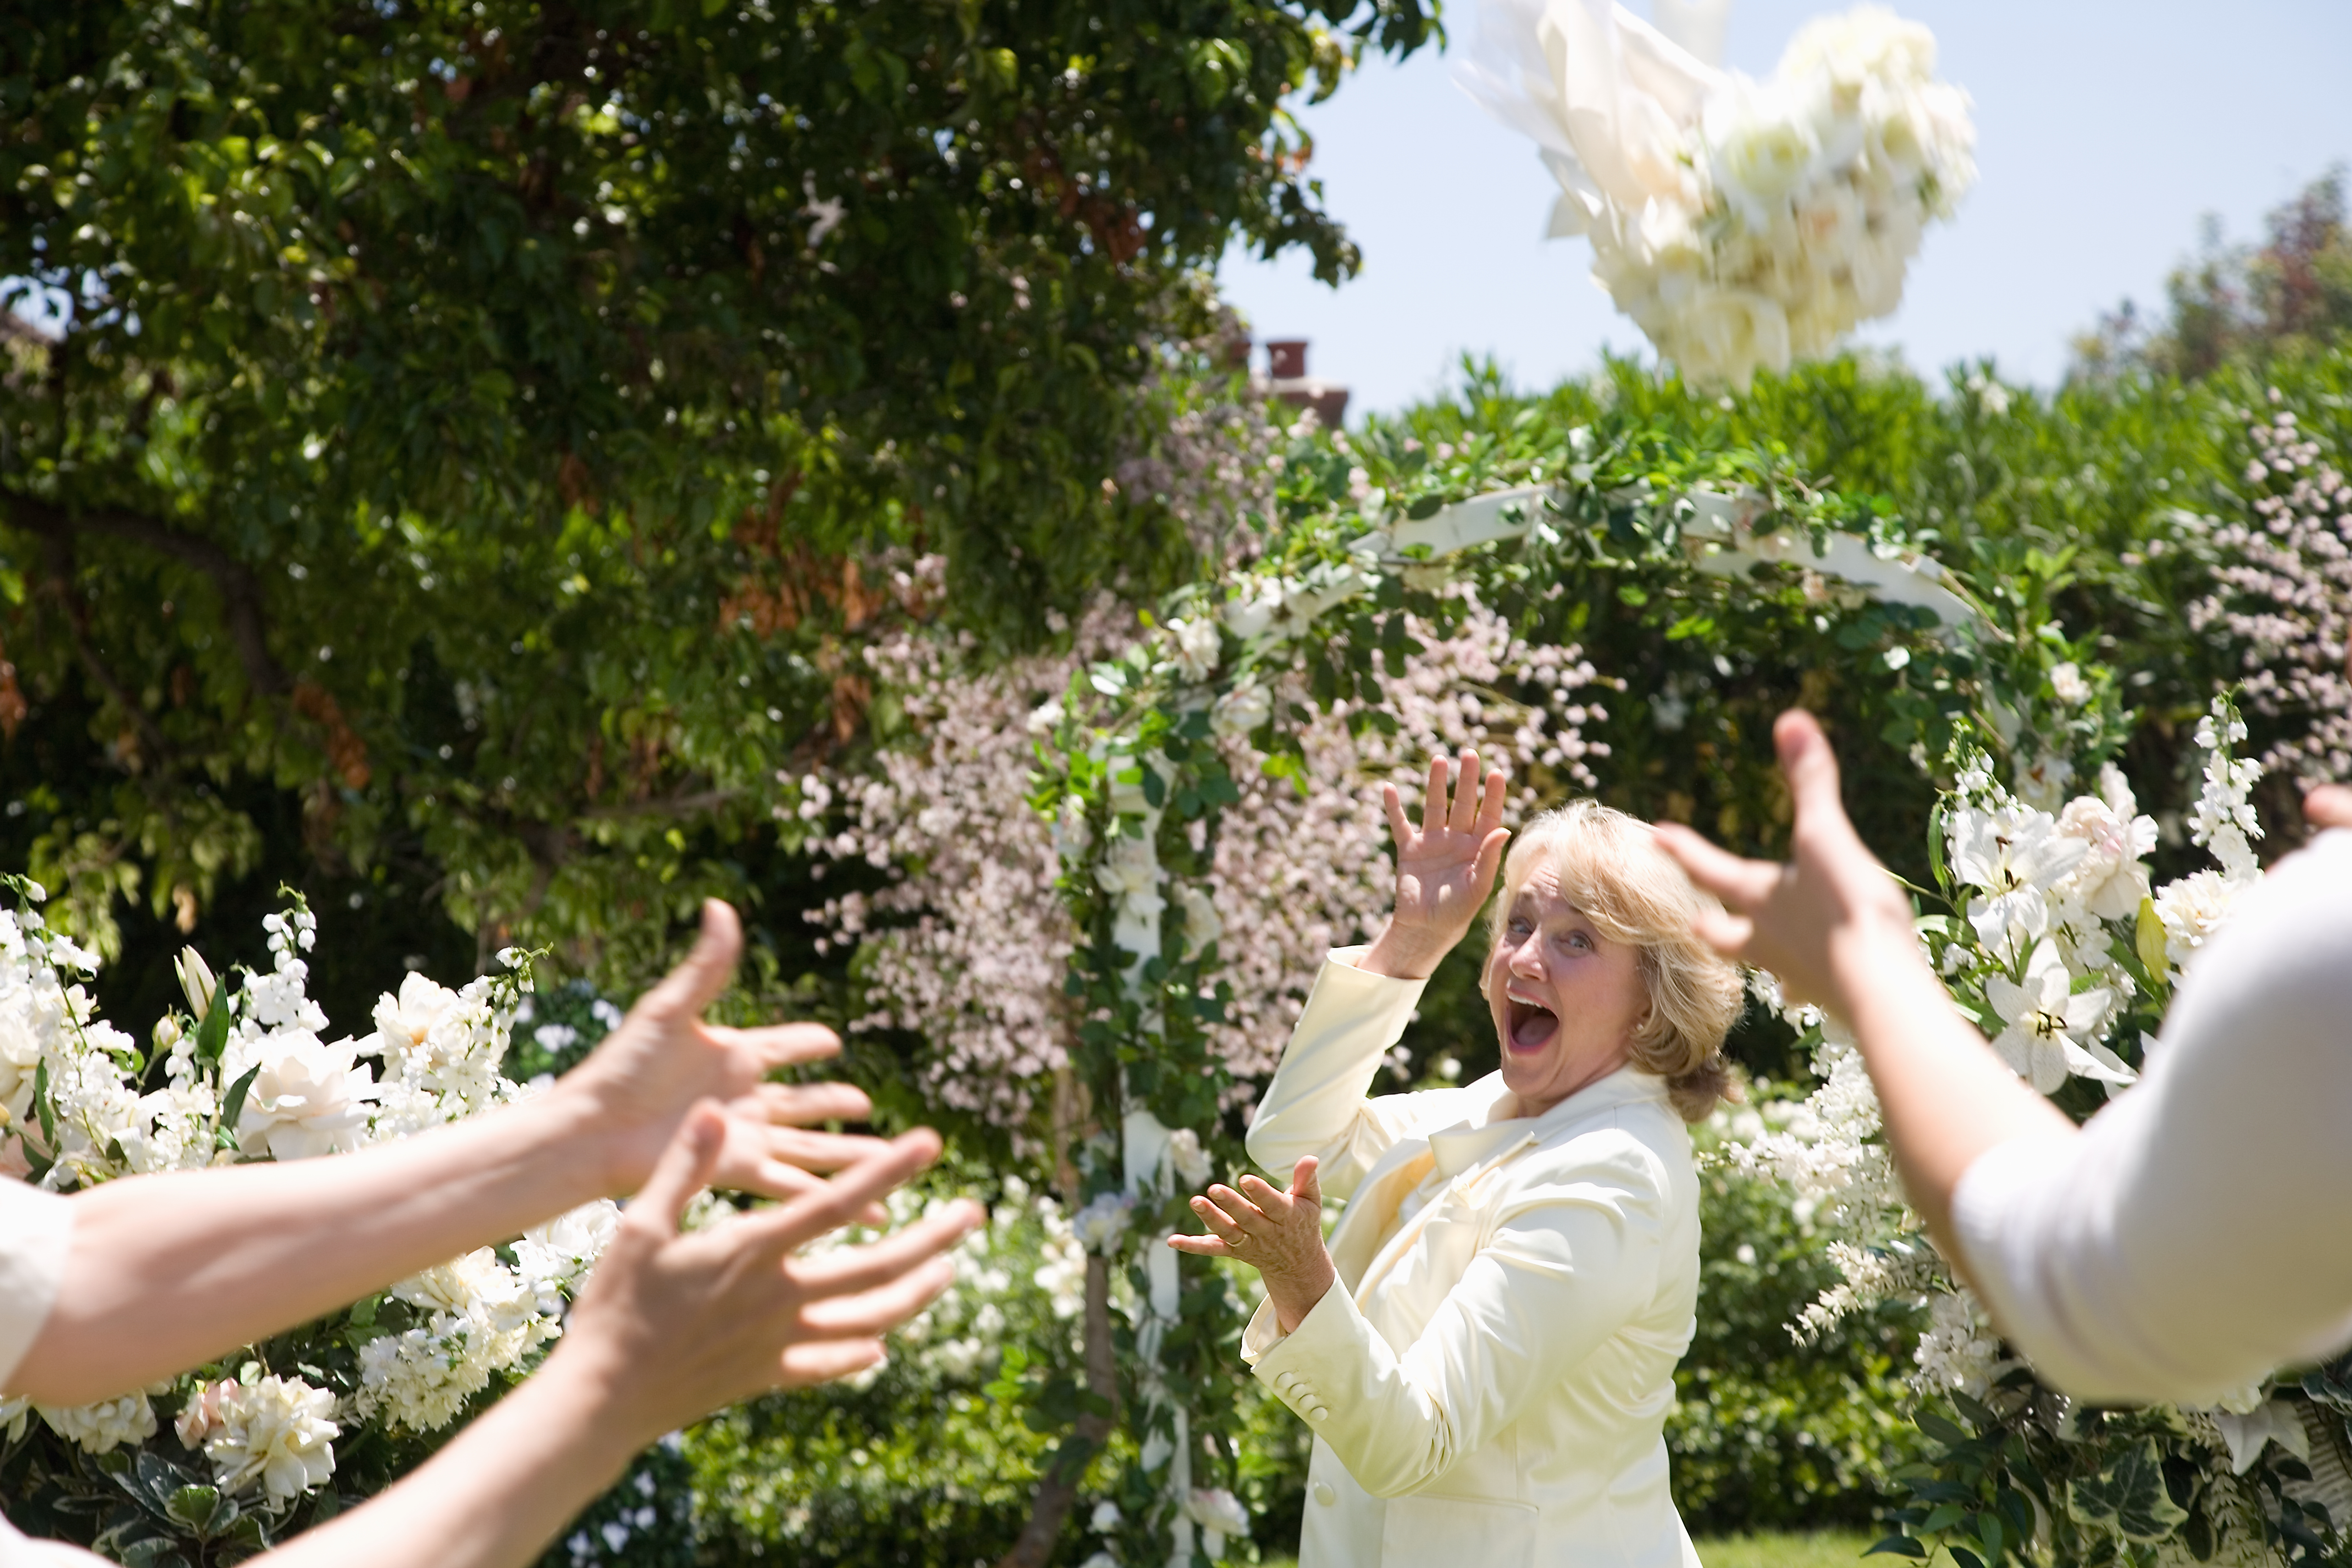 Bride throwing bouquet of flowers, laughing | Source: Getty Images